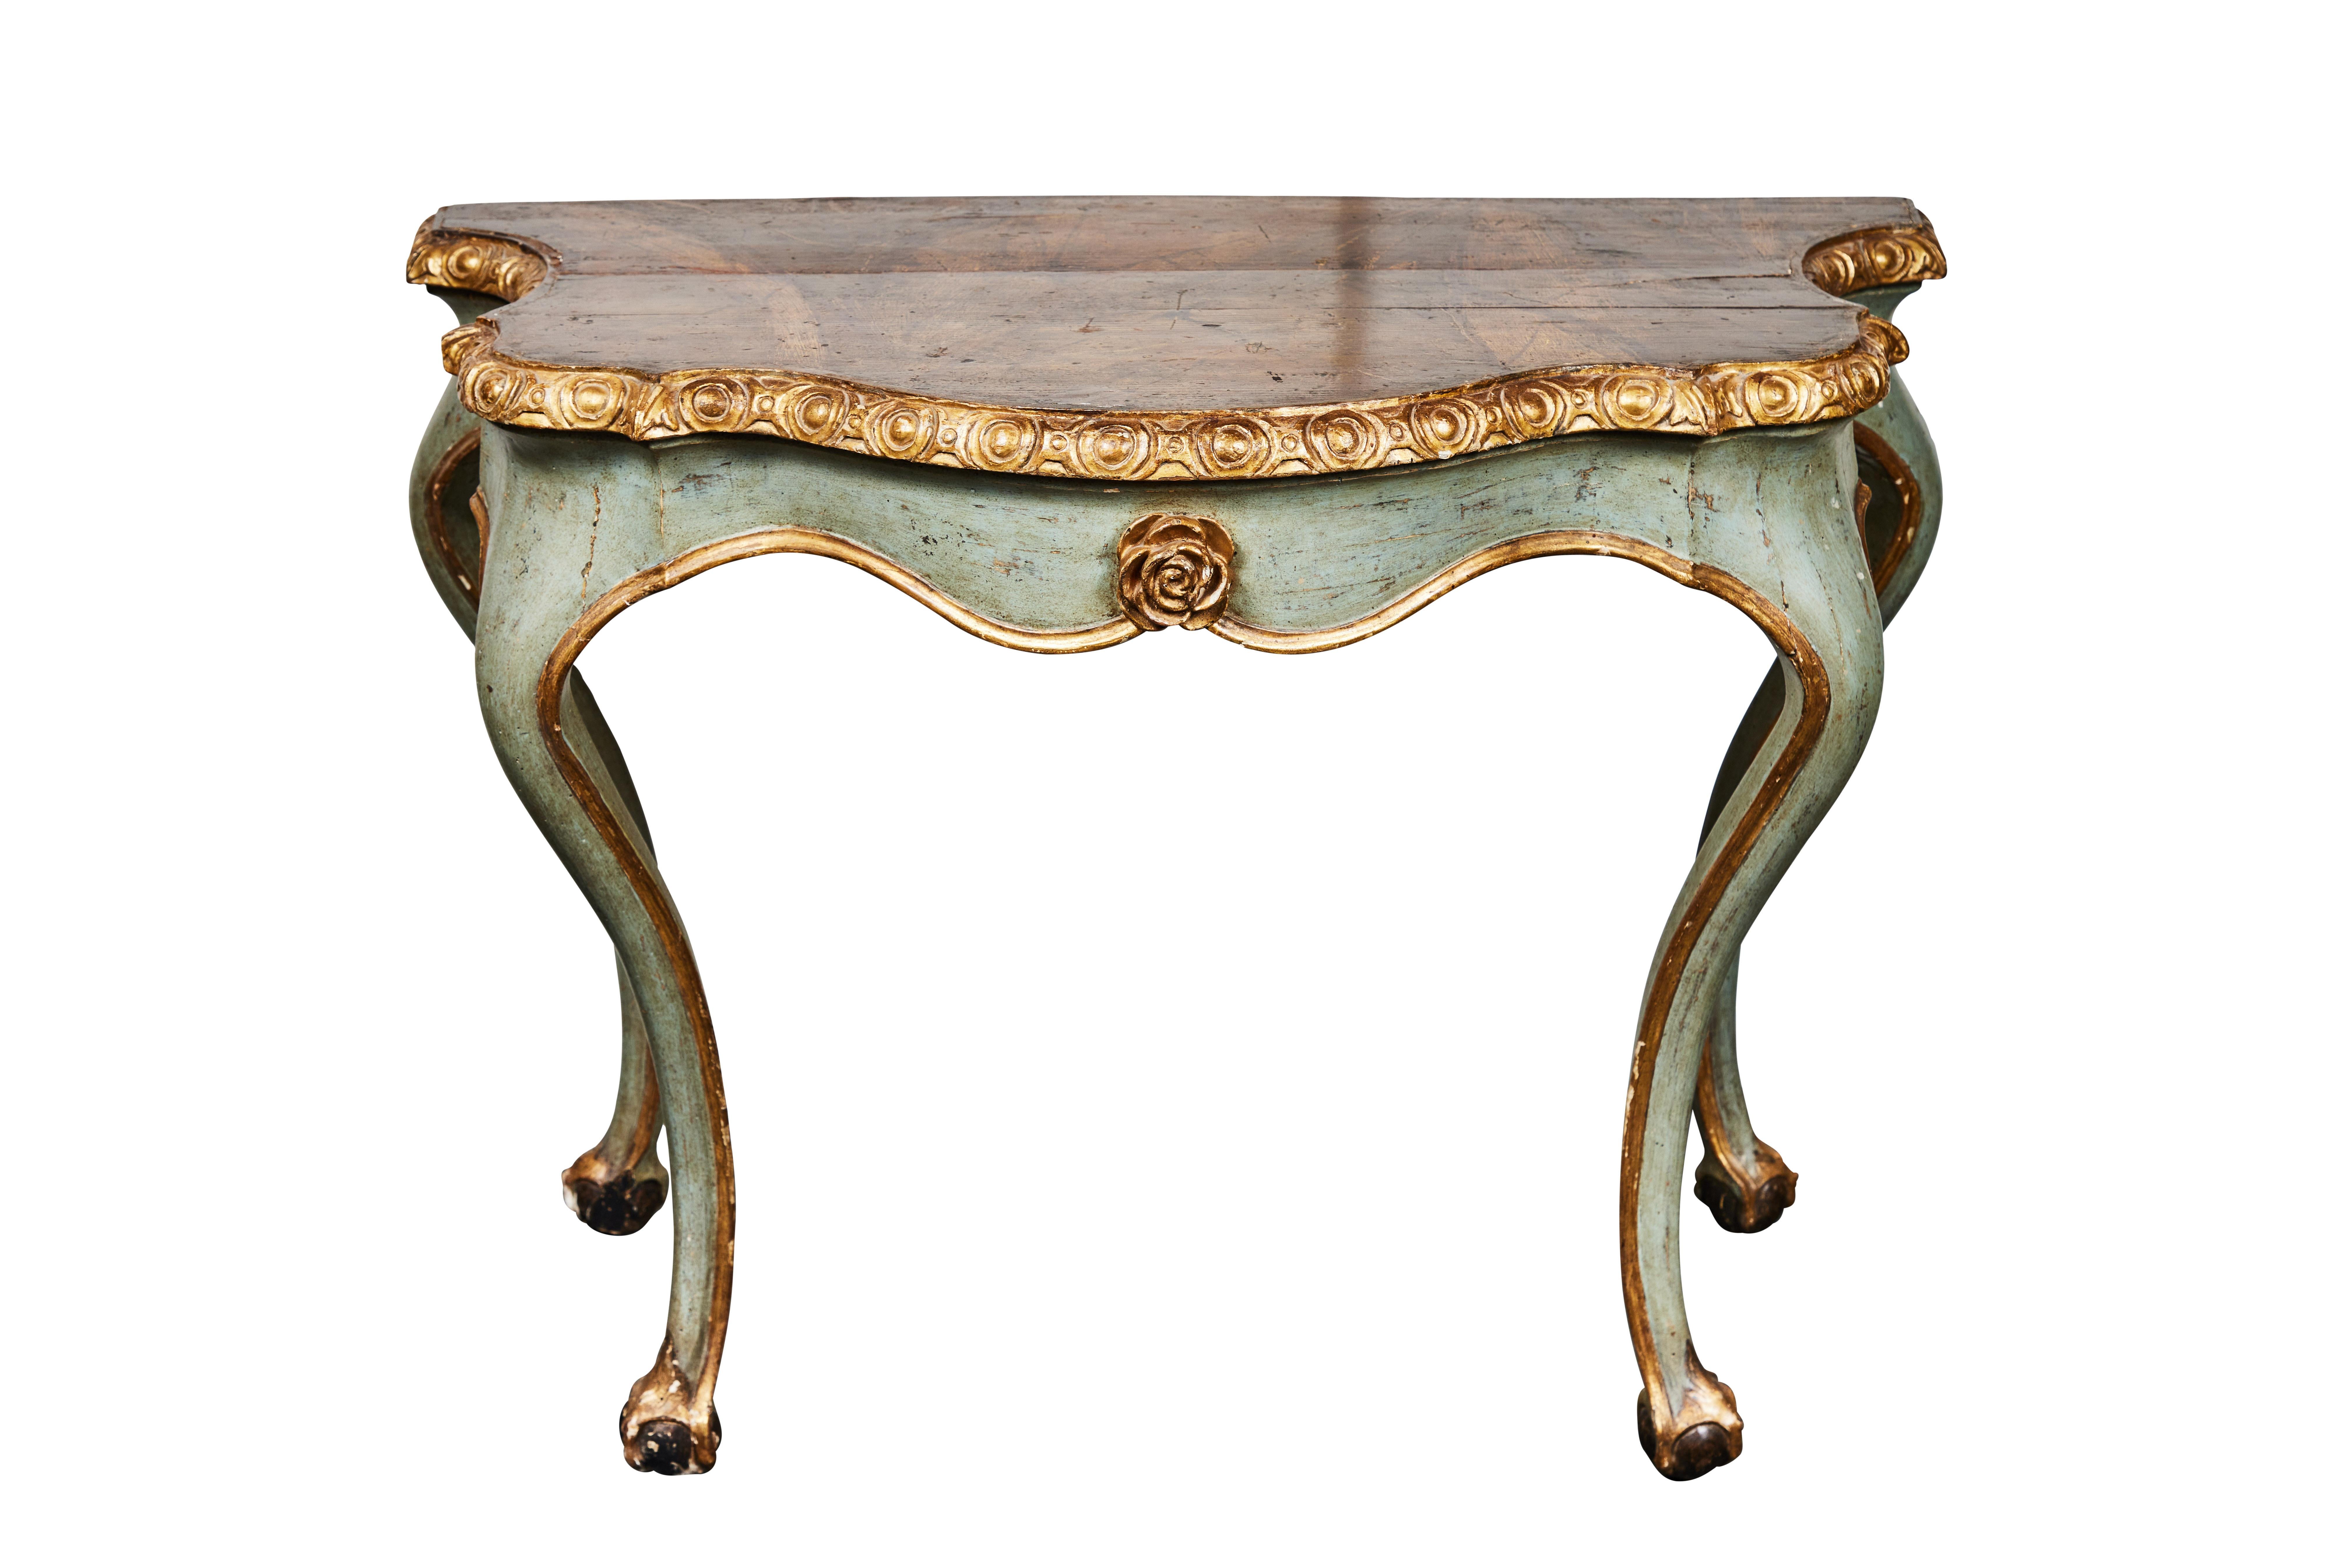 A remarkable pair of hand carved and painted, Italian, serpentine demilunes on unique, webbed claw and ball feet. The faux marble top sits above fine, 22-karat giltwood trim. Each piece is centered with a beautifully relief-carved and gilded rose in